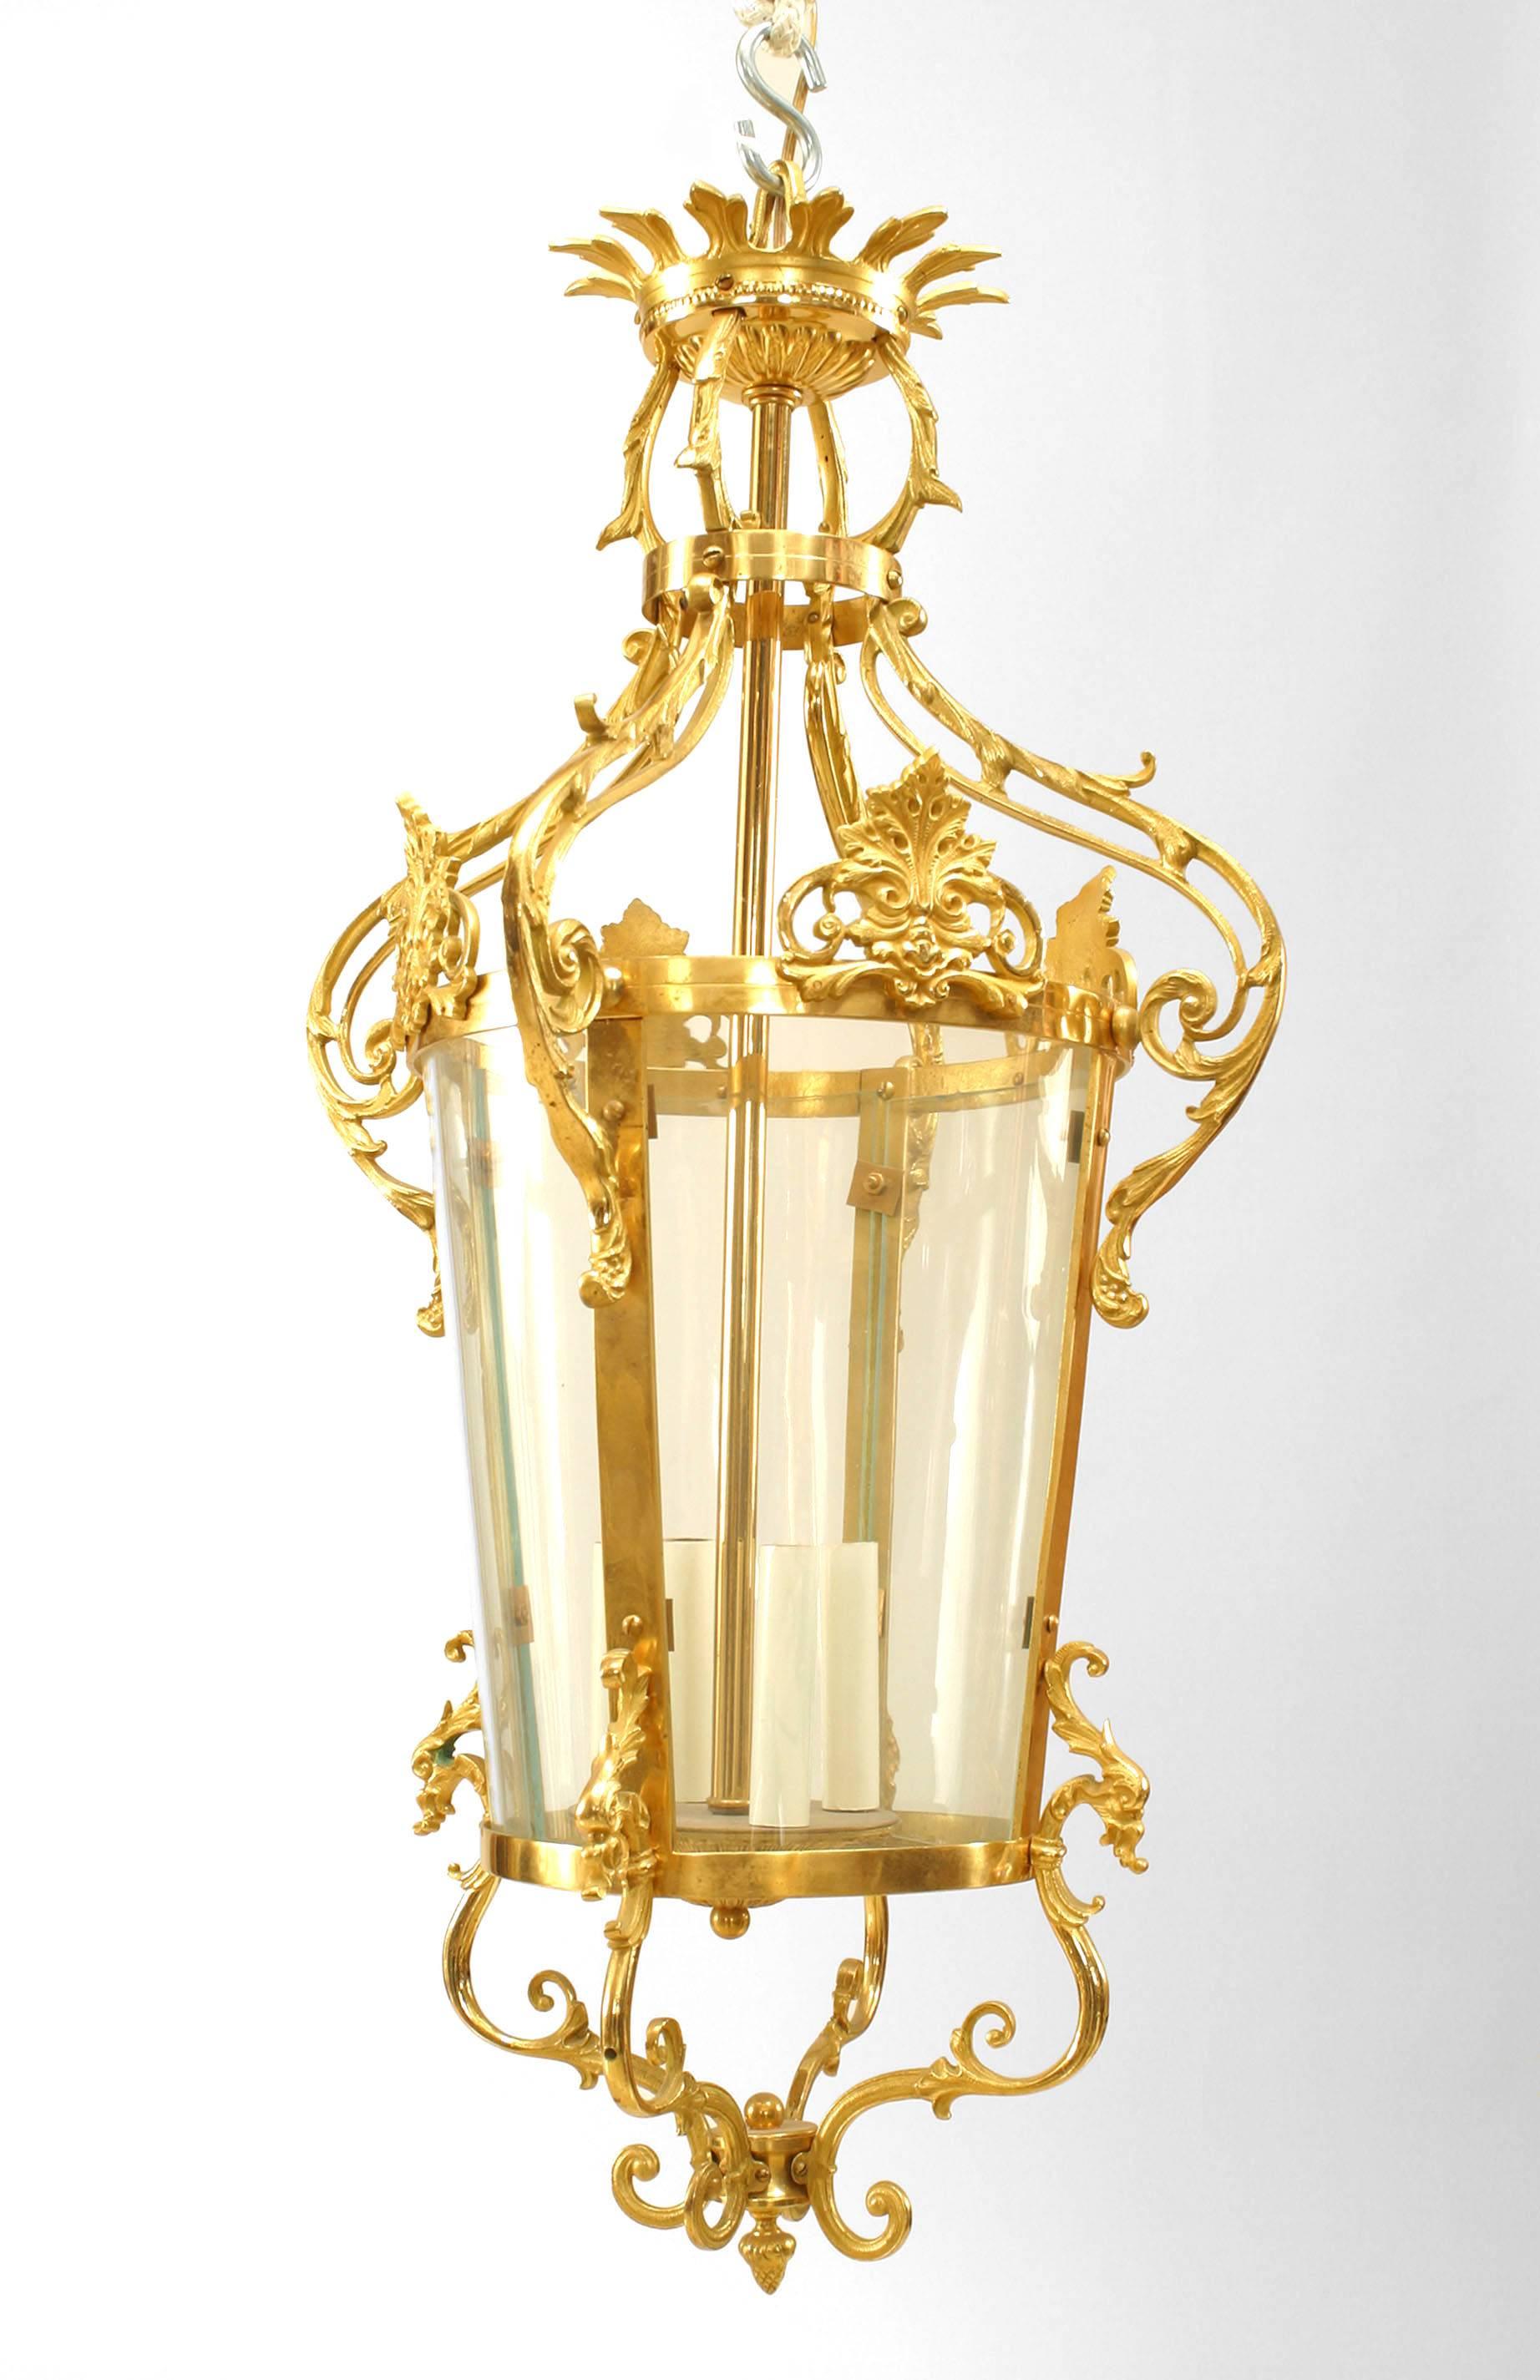 French Louis XVI style (20th Century) gilt bronze lantern with a 3 light center within 4 bent glass panels having scroll forms above and below with an acorn finial bottom.
